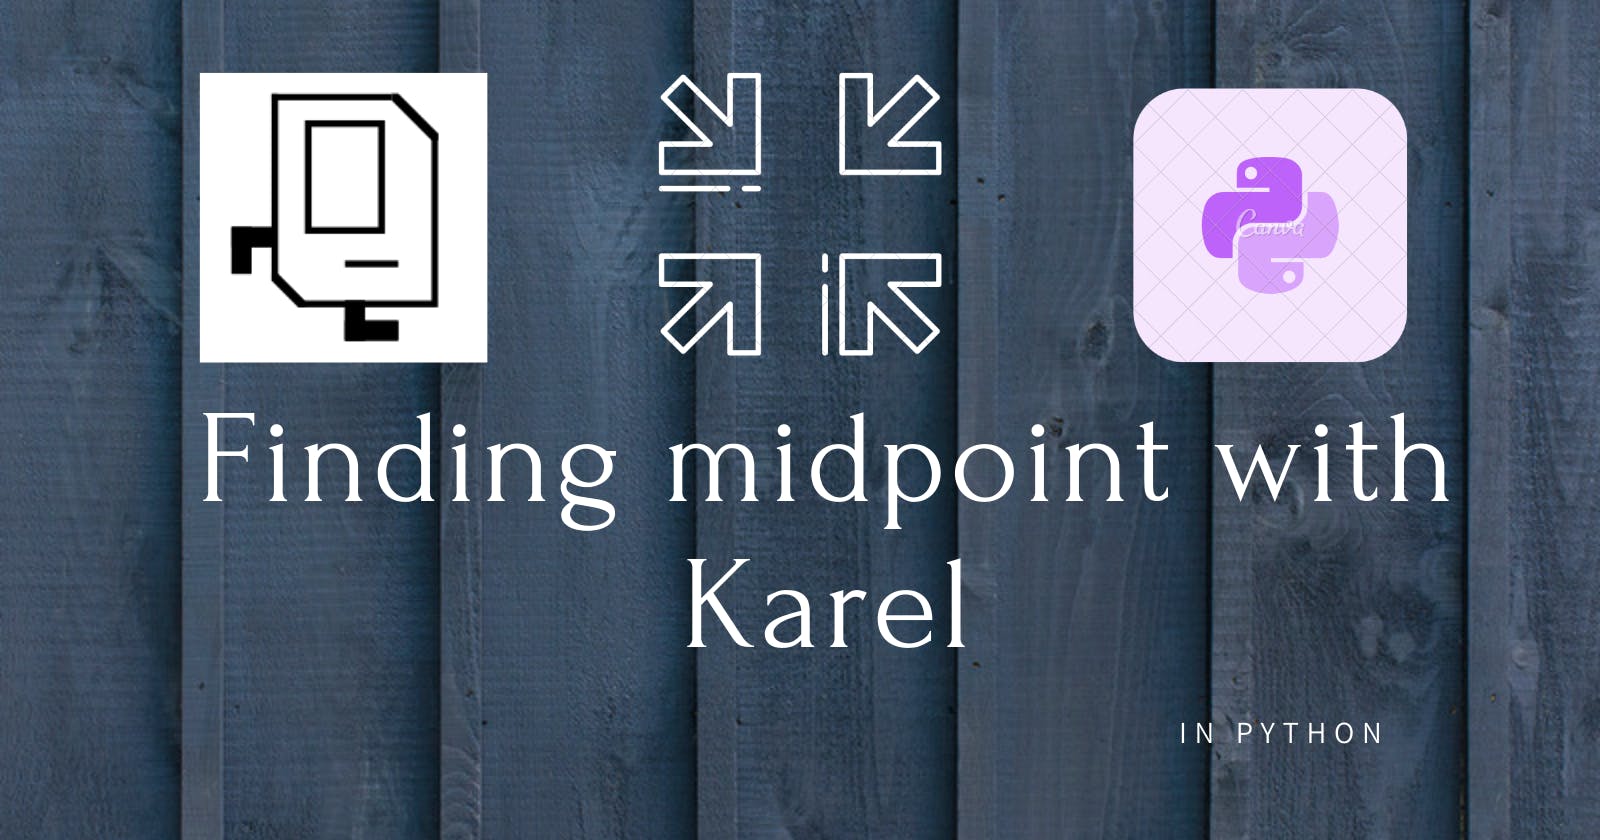 Midpoint with Karel in Python